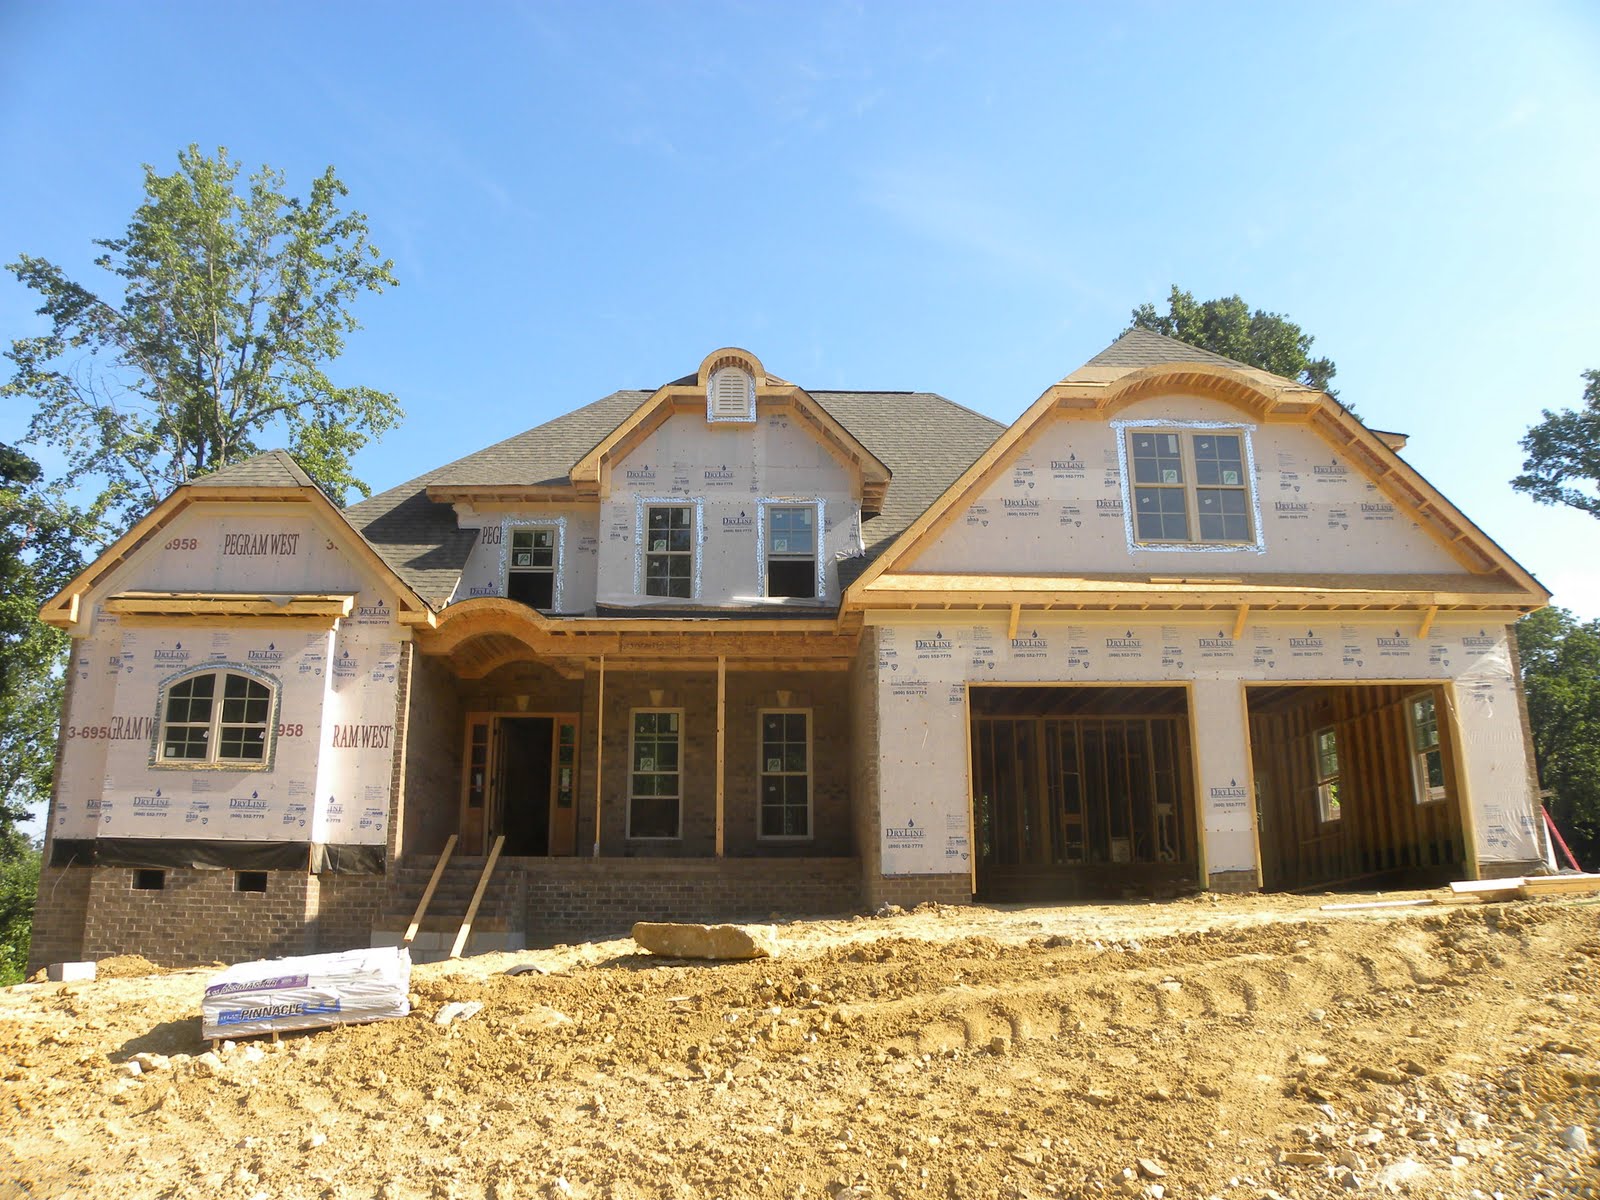 New Home Construction Ends The Year Strong